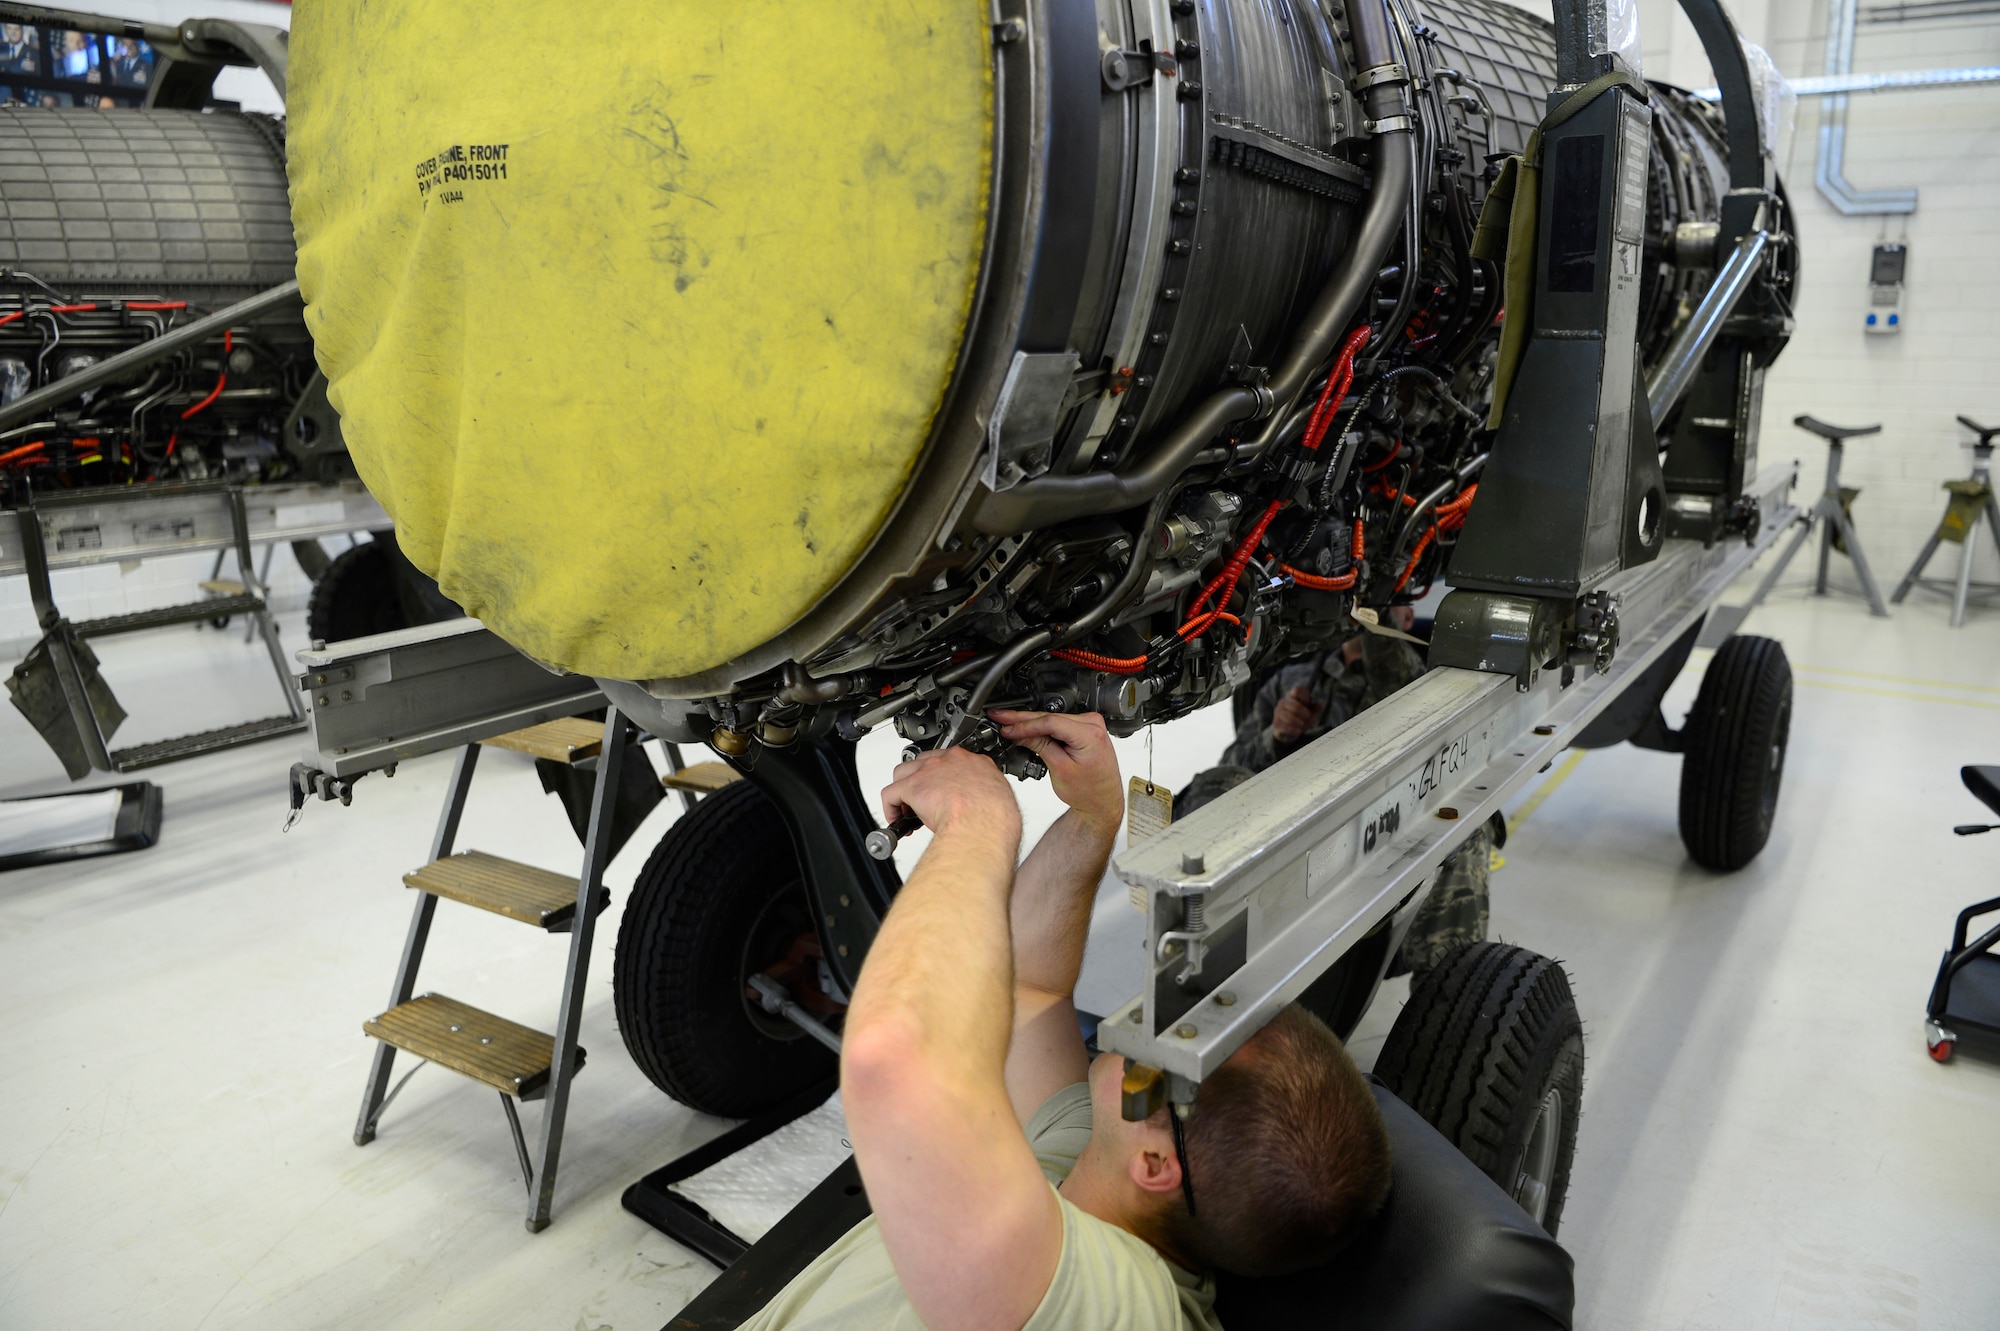 Minnesota Air National Guard Airmen are at Spangdahlem in support of the 52nd Maintenance Squadron to help in any tasks available such as F-16 engine repairs.